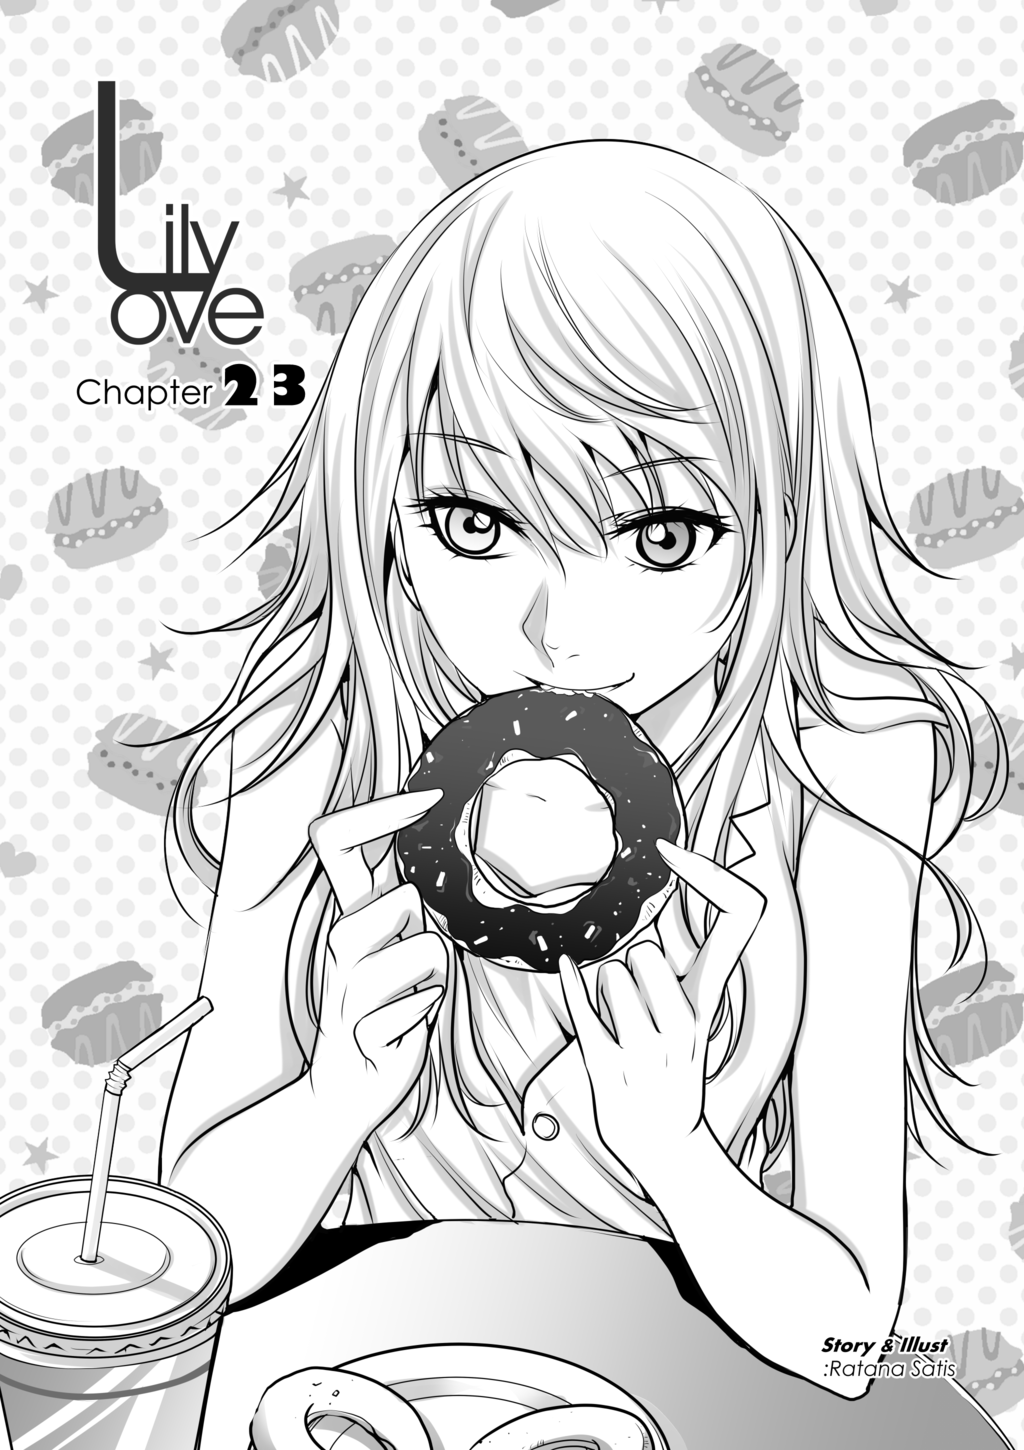   Lily Love Chapter 23 - RAWS are here :D (log in via FB to see or create account